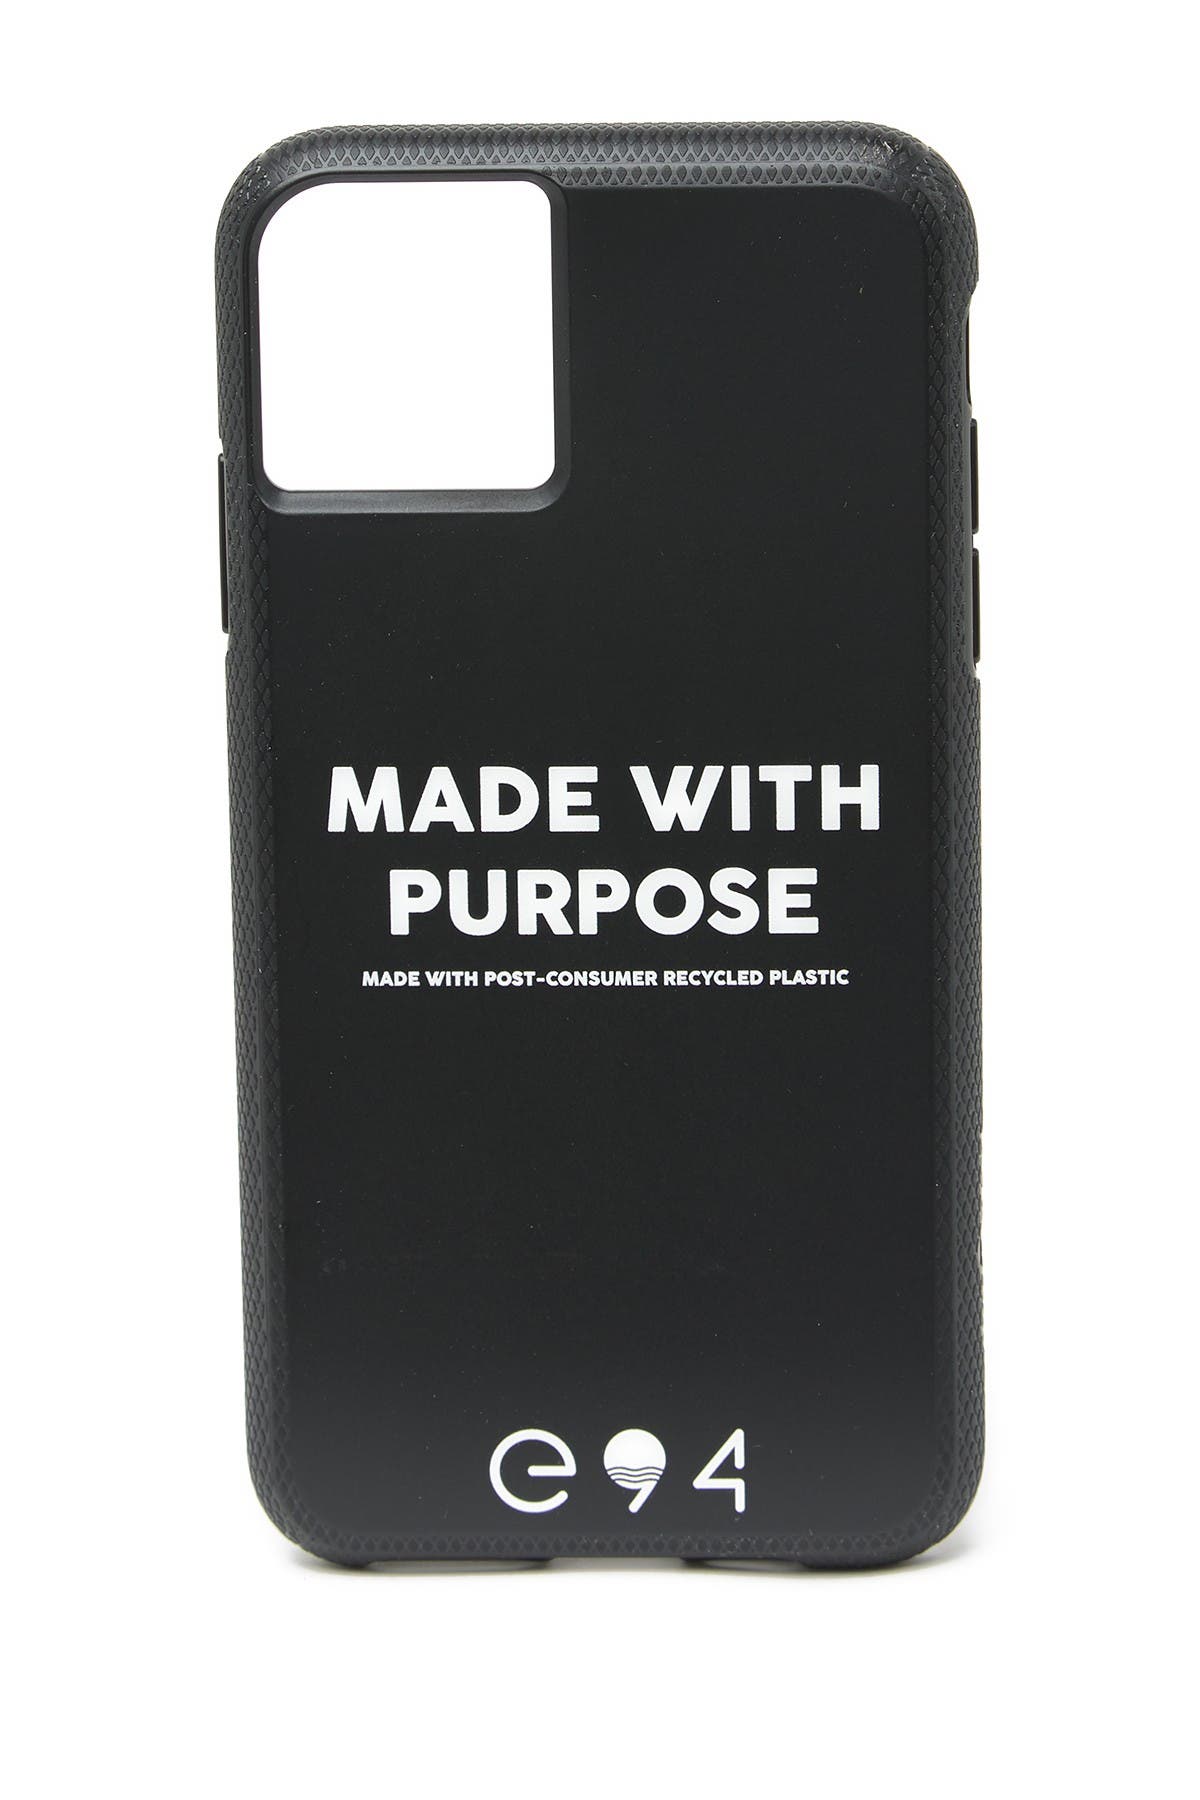 Case-mate Iphone 11 Pro Max/xs Max Eco94 Phone Case In Made With Purpose